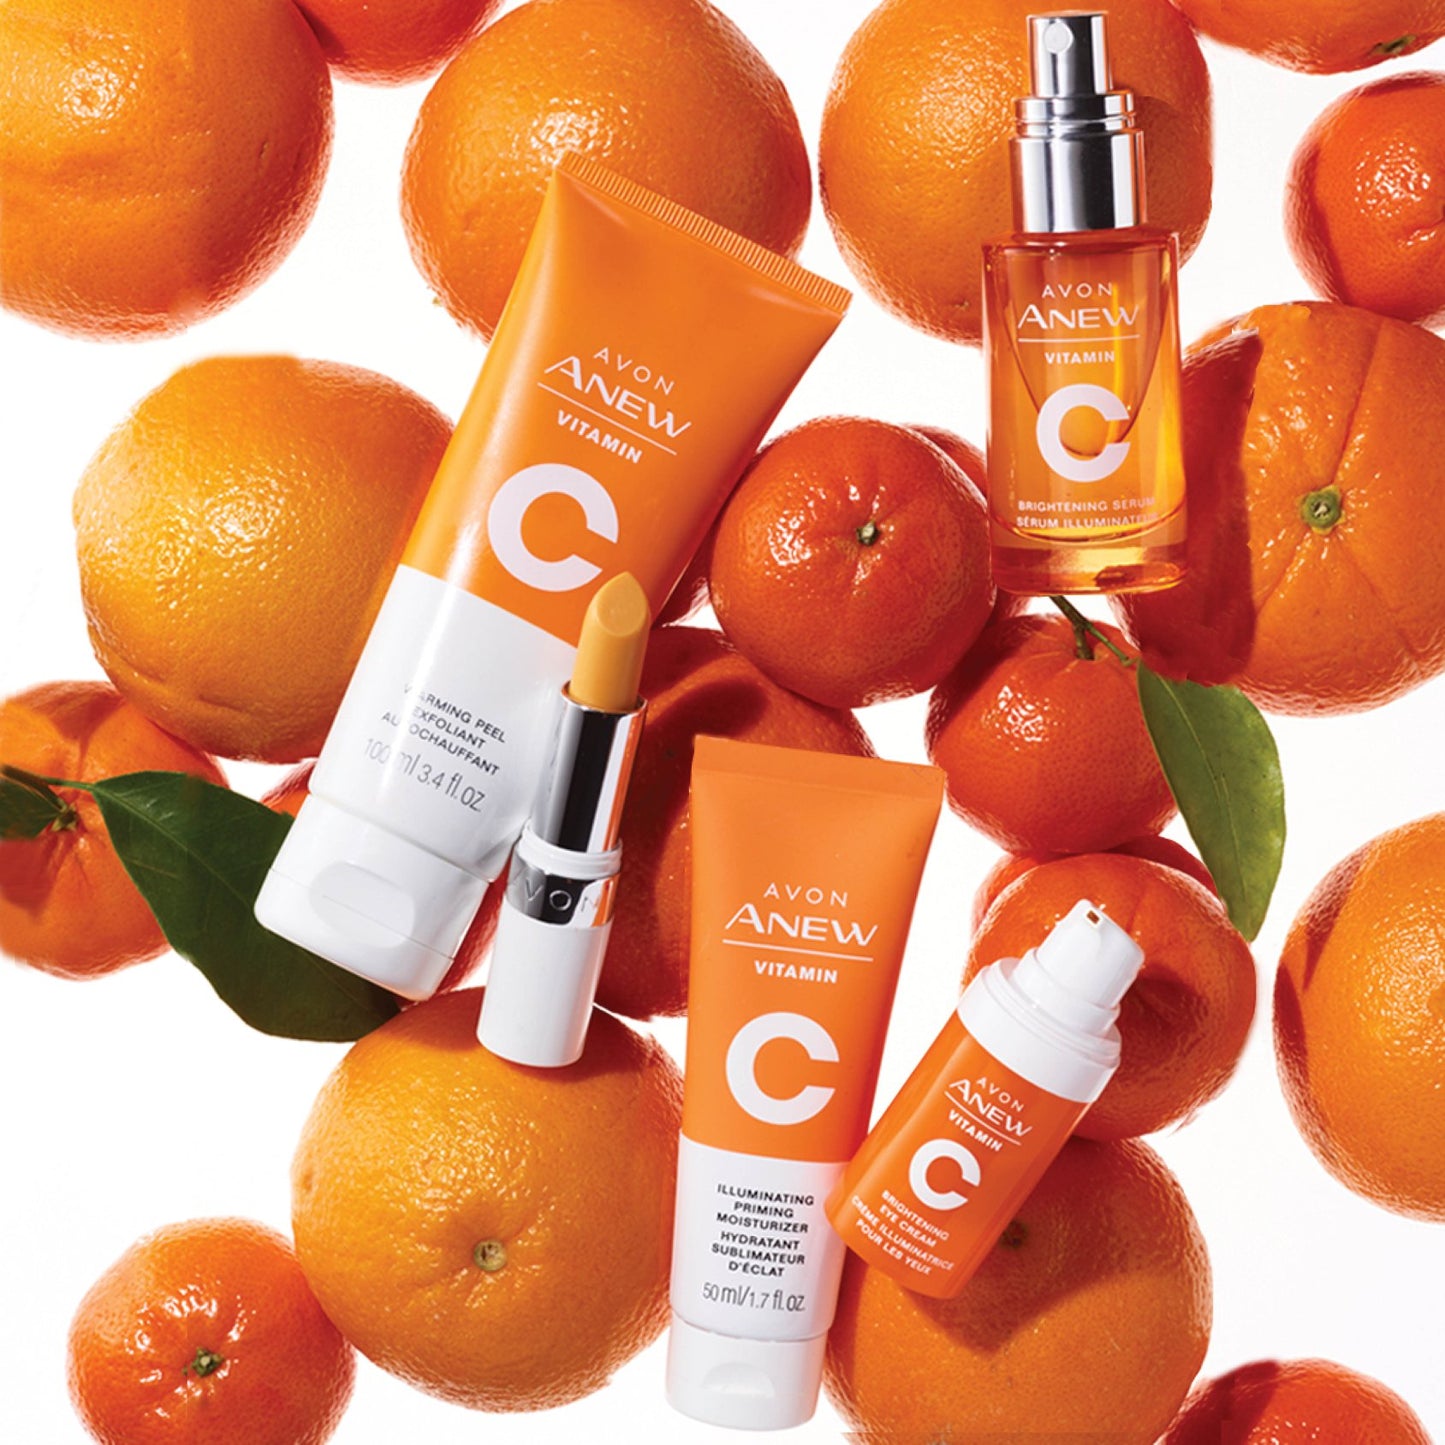 Anew Vitamin C Products